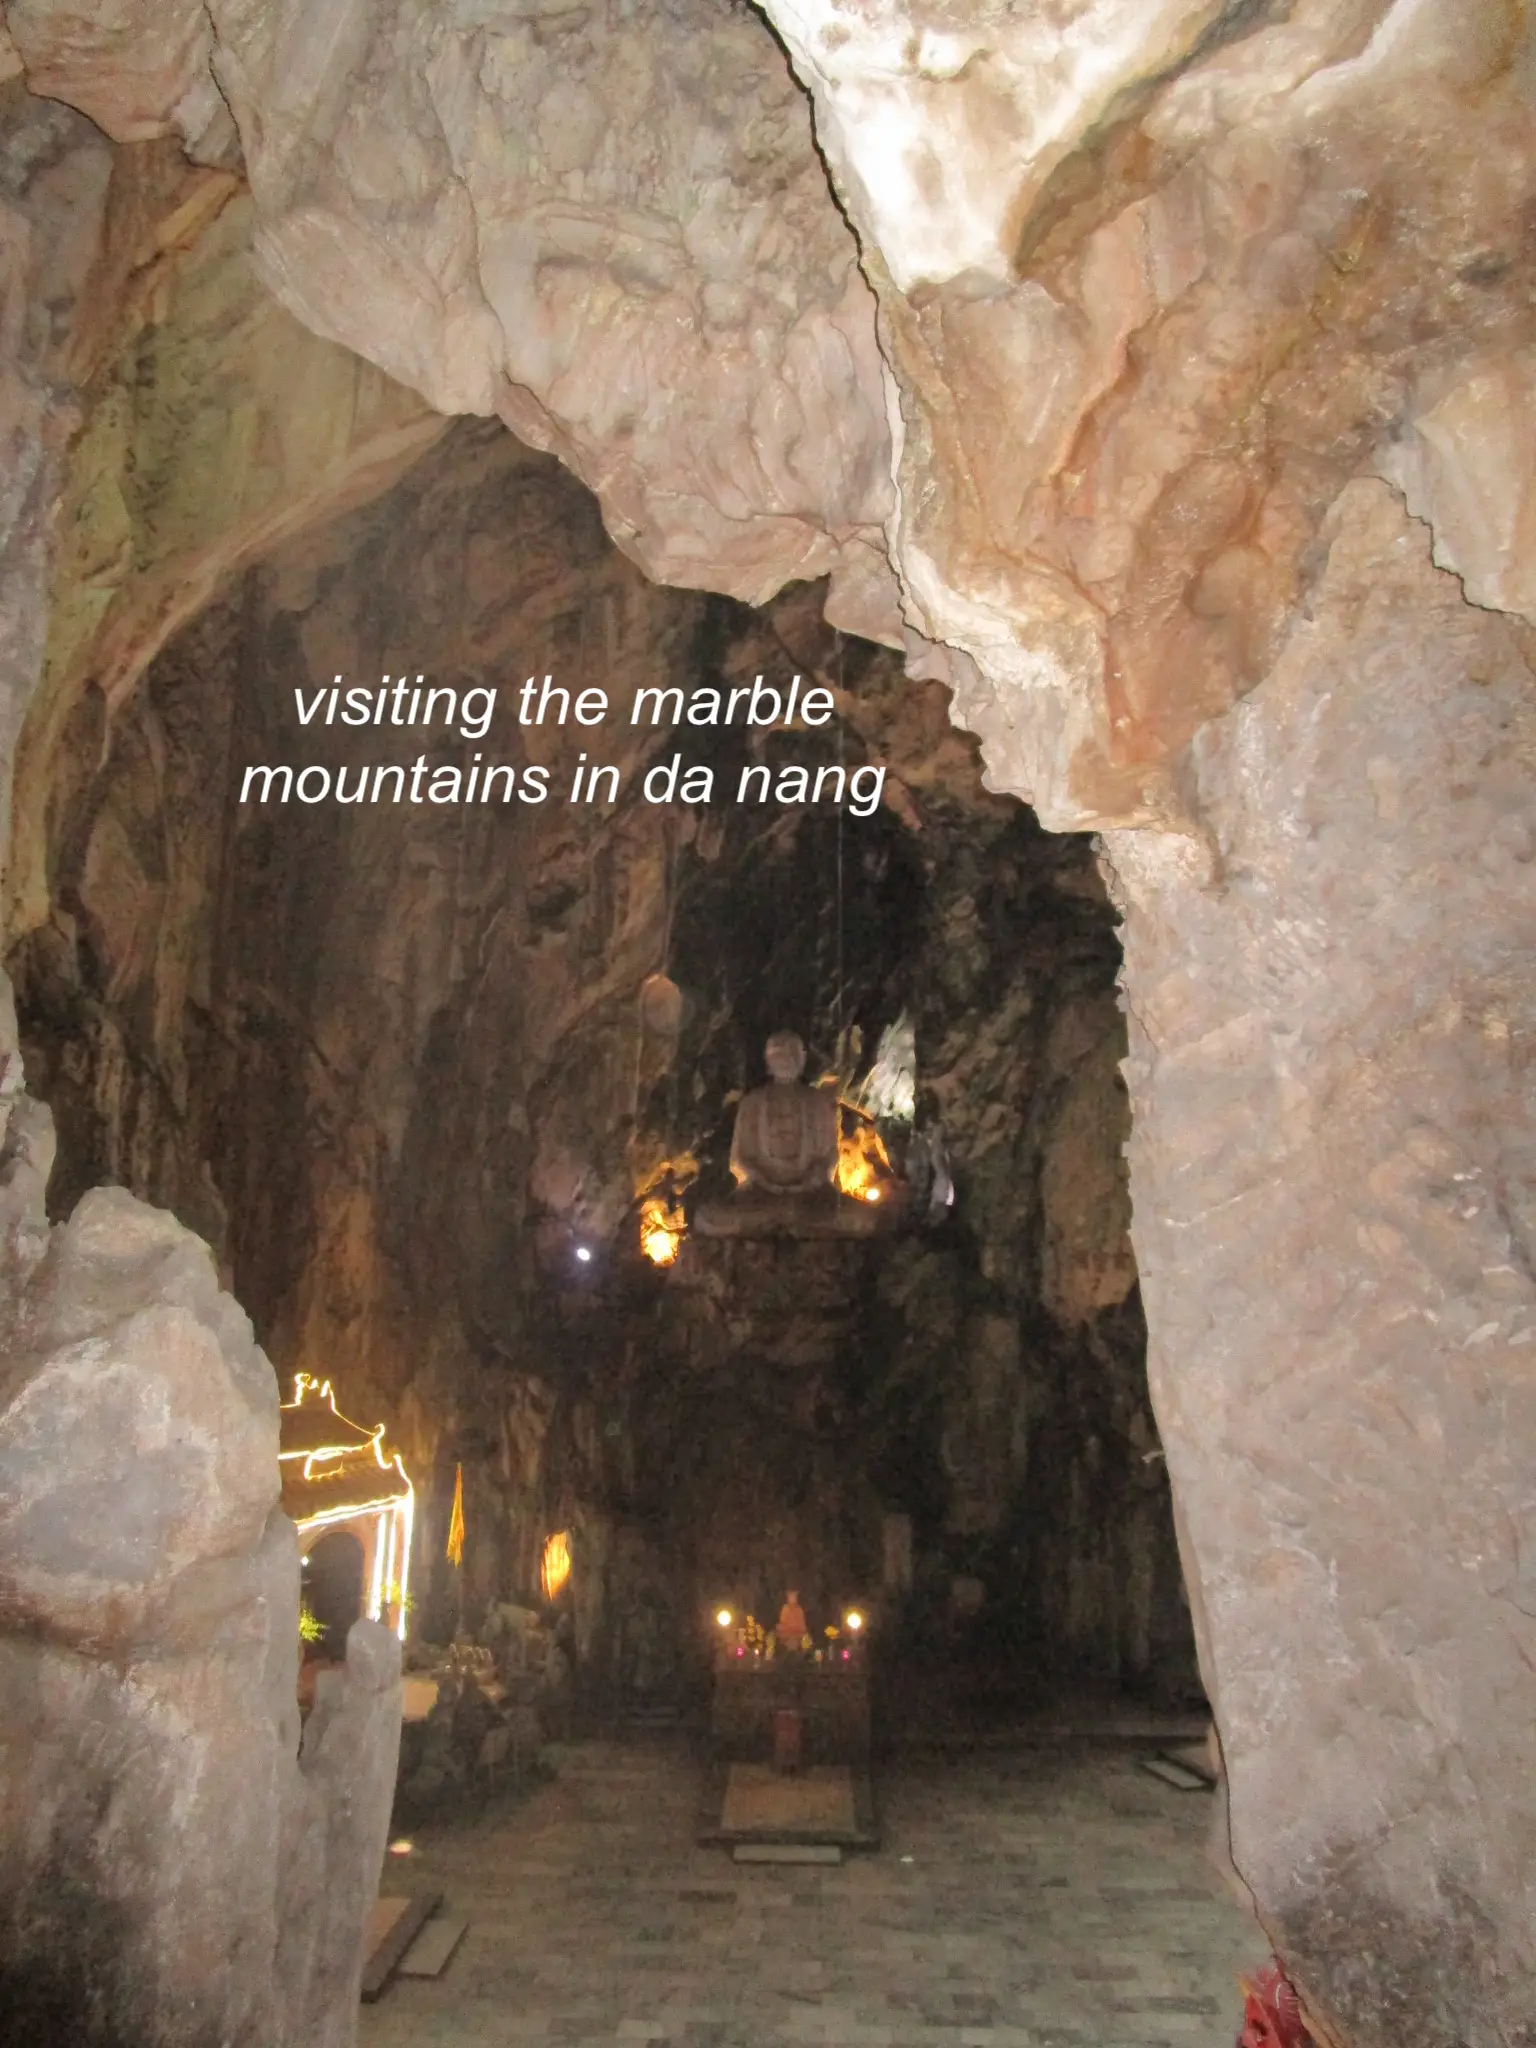 da nang's marble mountains, tips + cost!'s images(0)